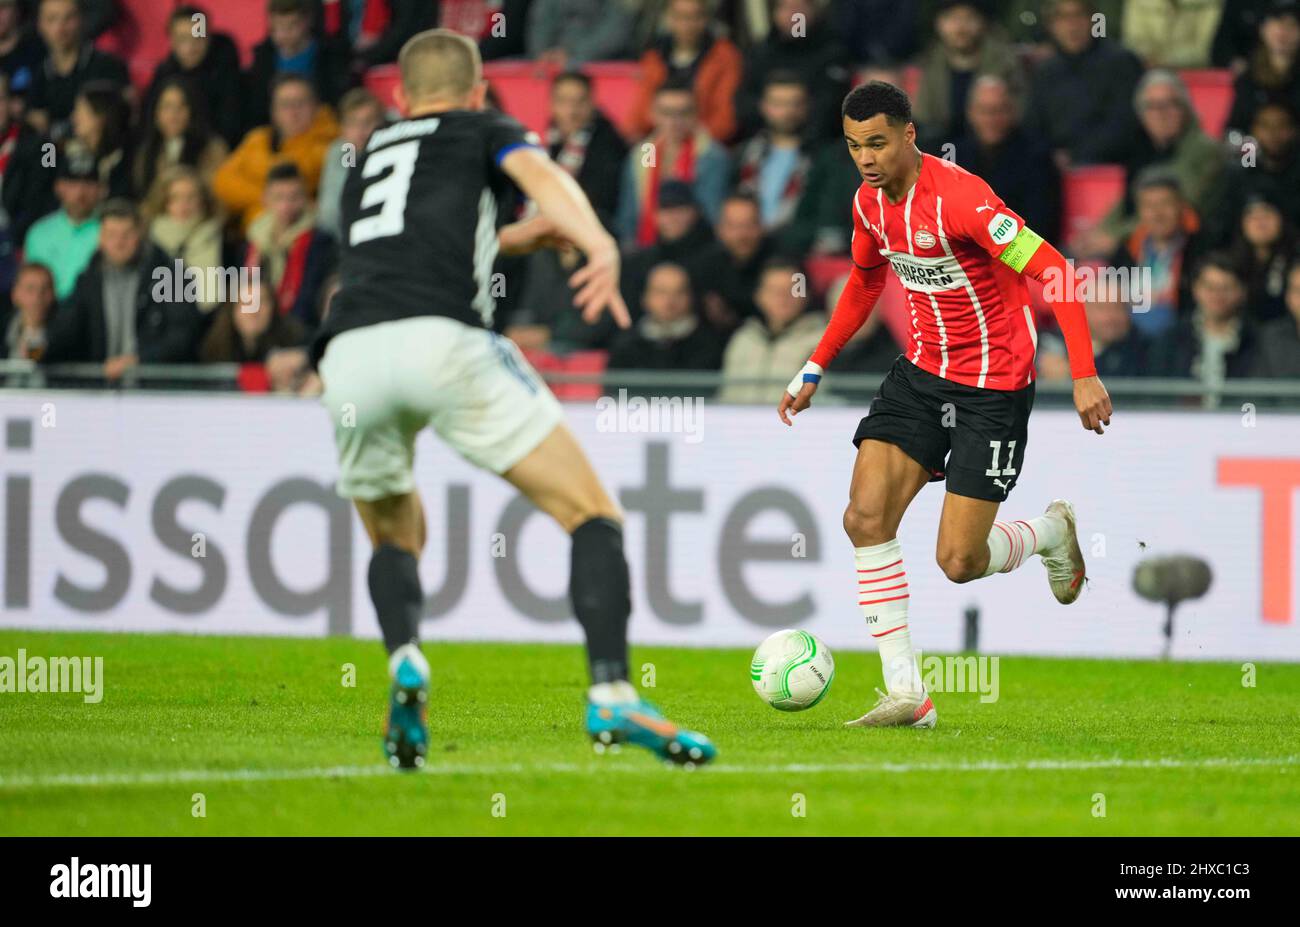 Philips Stadium, Eindhoven, Netherlands. 10th Mar, 2022. Cody Gakpo of PSV Eindhoven controls the ball during PSV Eindhoven v FC KÃ¸benhavn, at Philips Stadium, Eindhoven, Netherlands. Kim Price/CSM/Alamy Live News Stock Photo